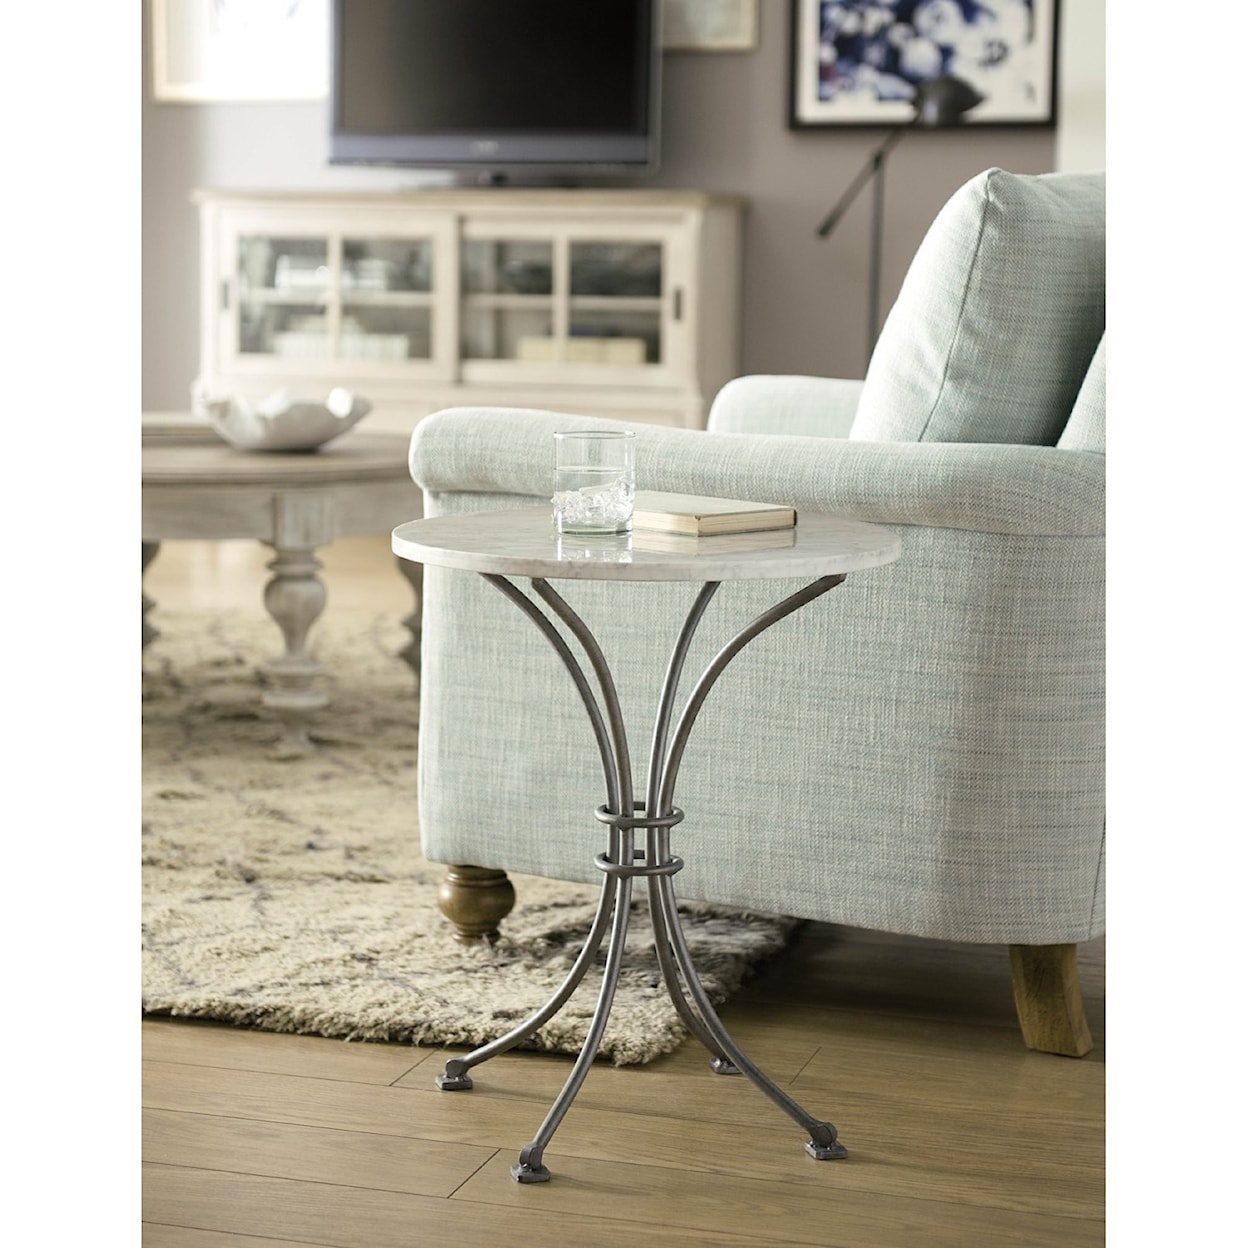 American Drew Litchfield 750 Dover Chair Side Table